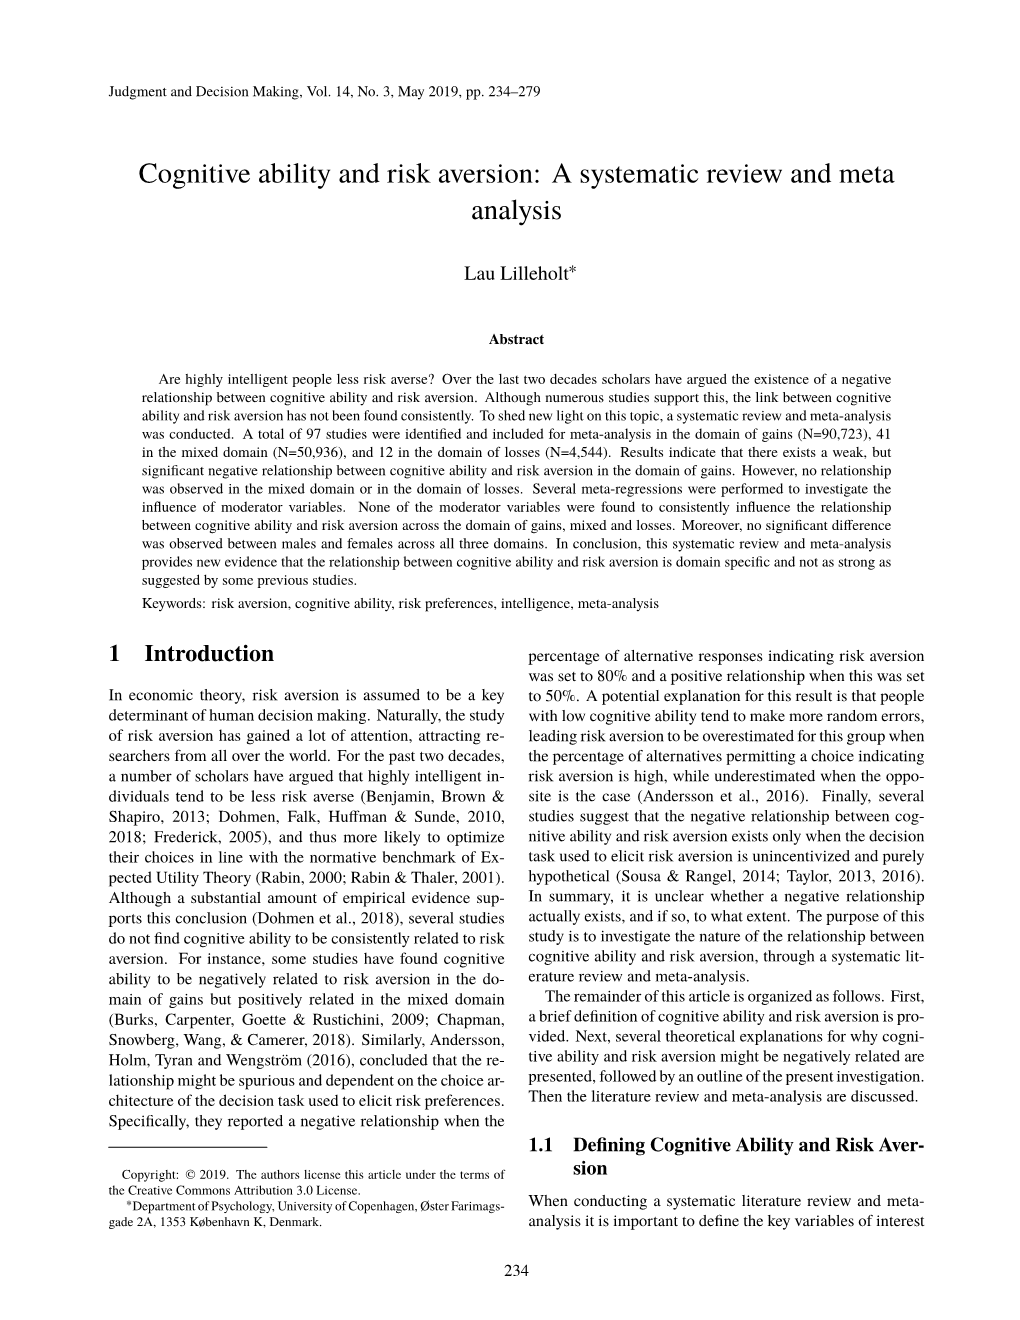 Cognitive Ability and Risk Aversion: a Systematic Review and Meta Analysis